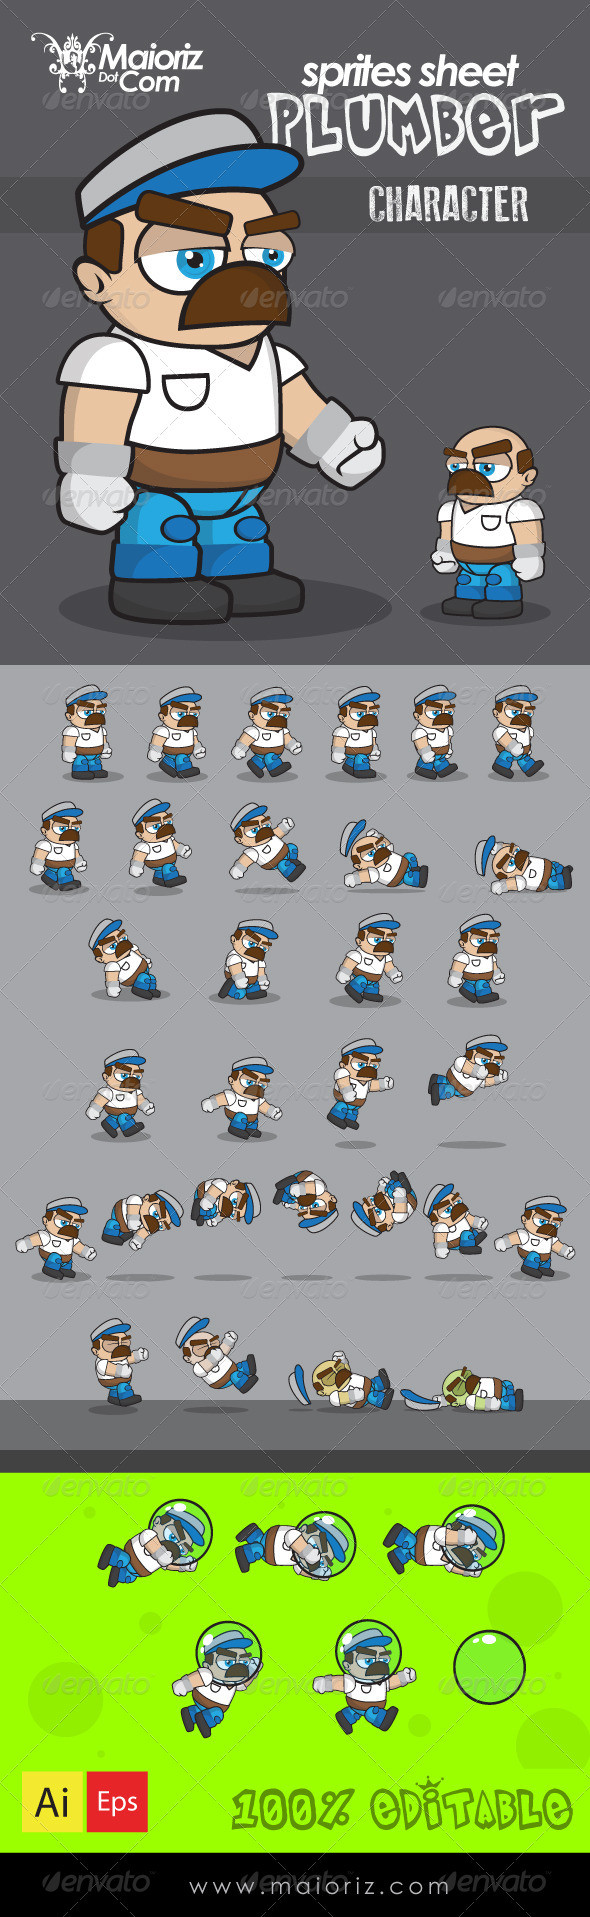 01 plumber character preview